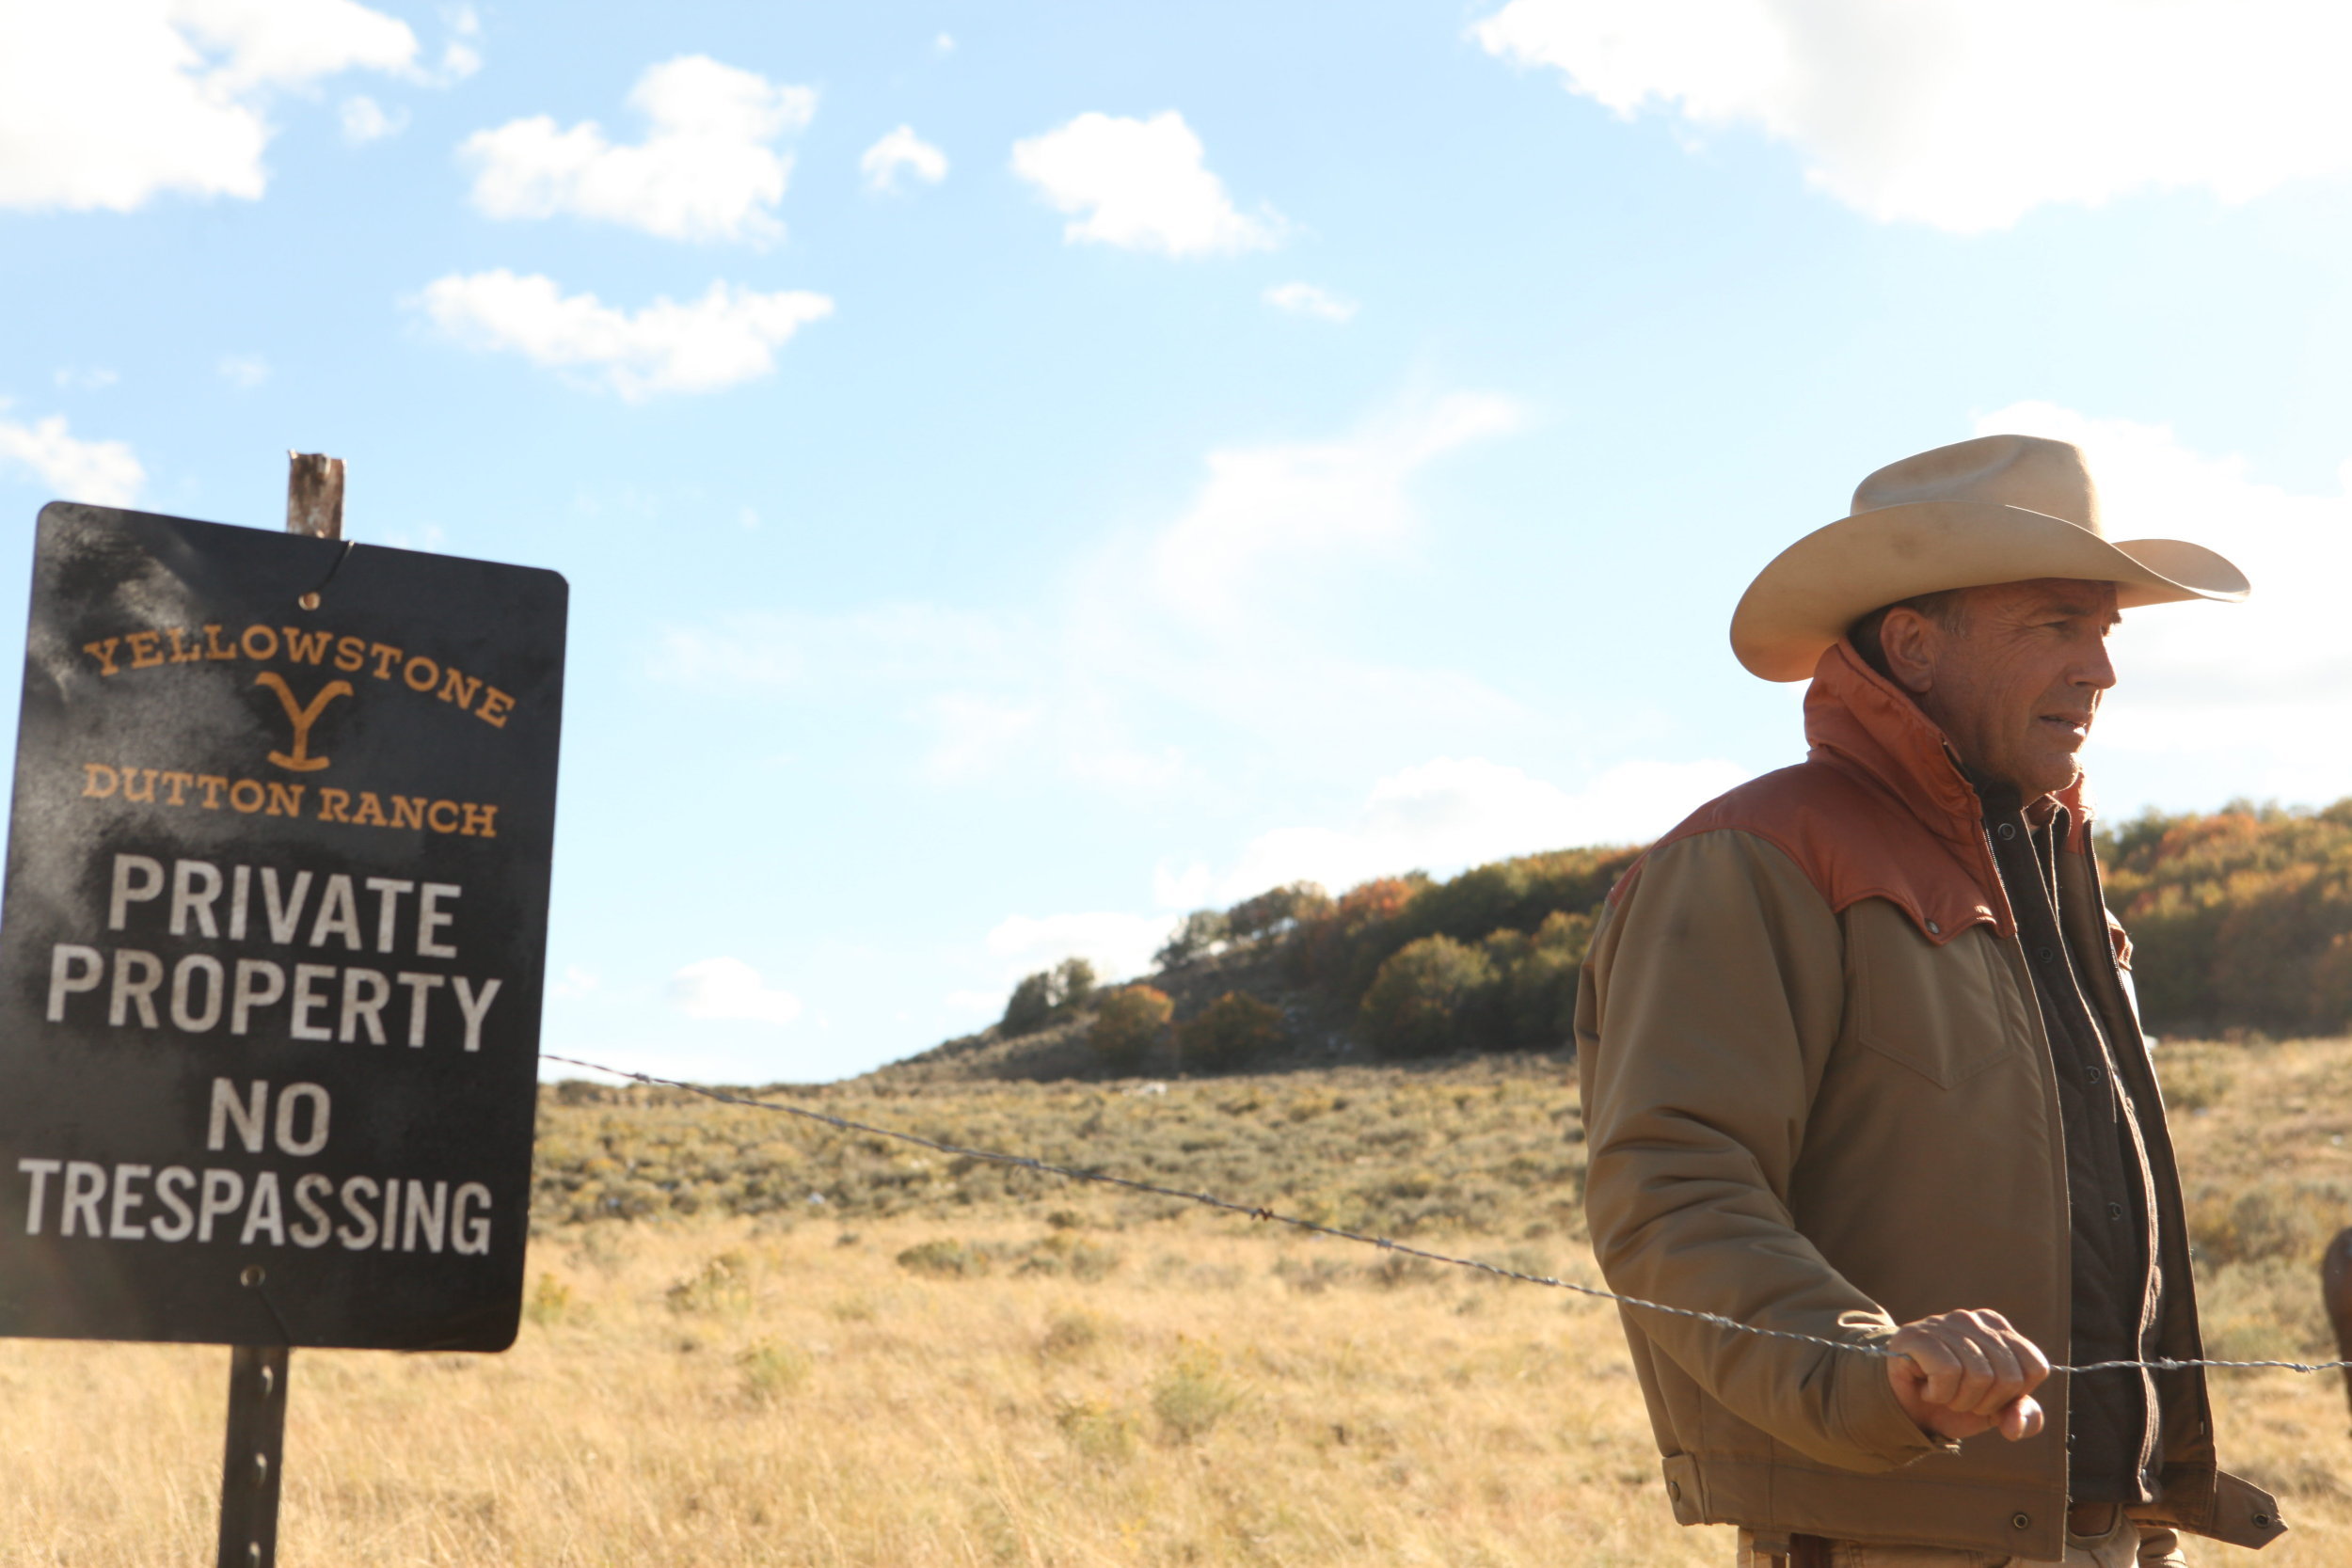 ART OF THE CUT with the editors of "Yellowstone" 14